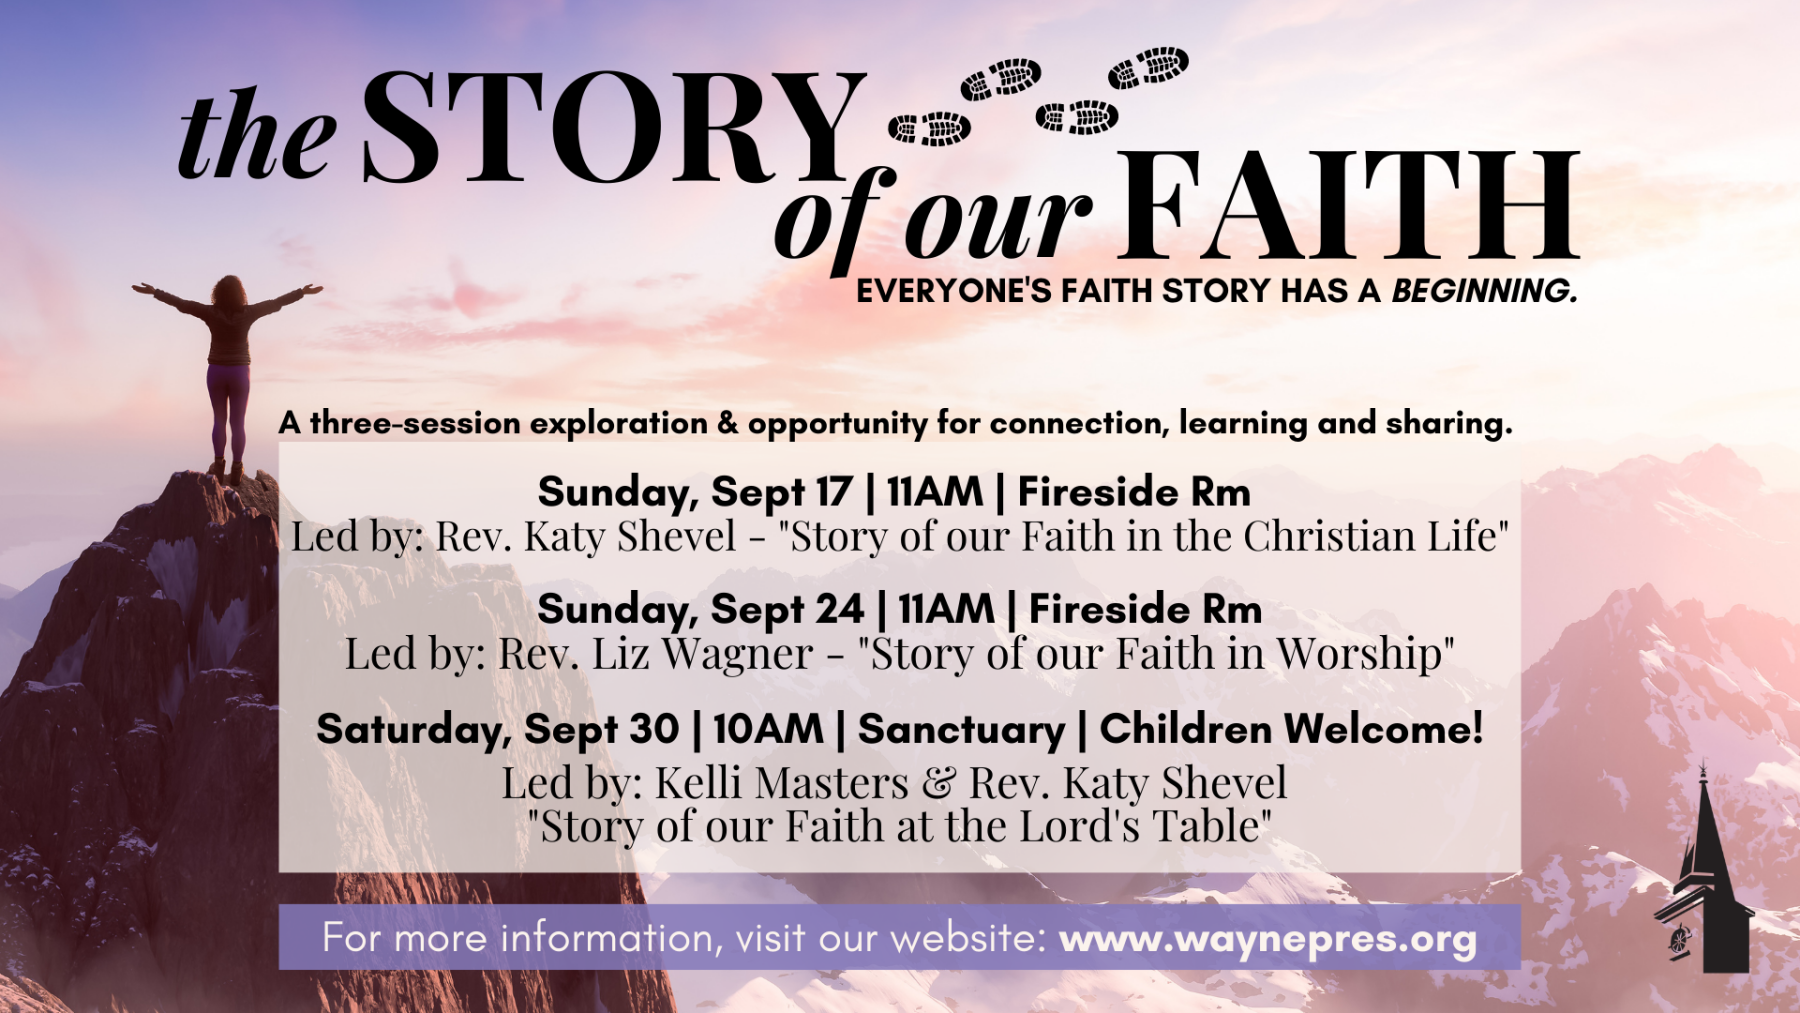 Story of our Faith #3 - at the Lord’s Table with Kelli Masters and Rev. Katy